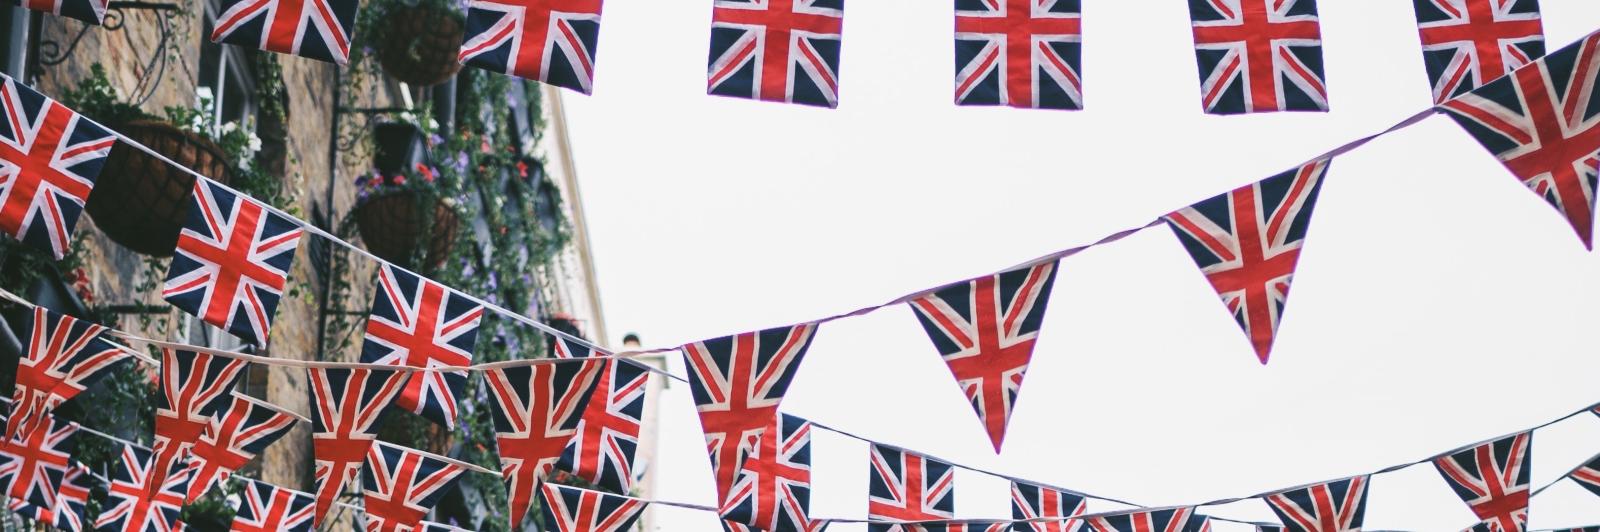 Bunting with the Union Jack